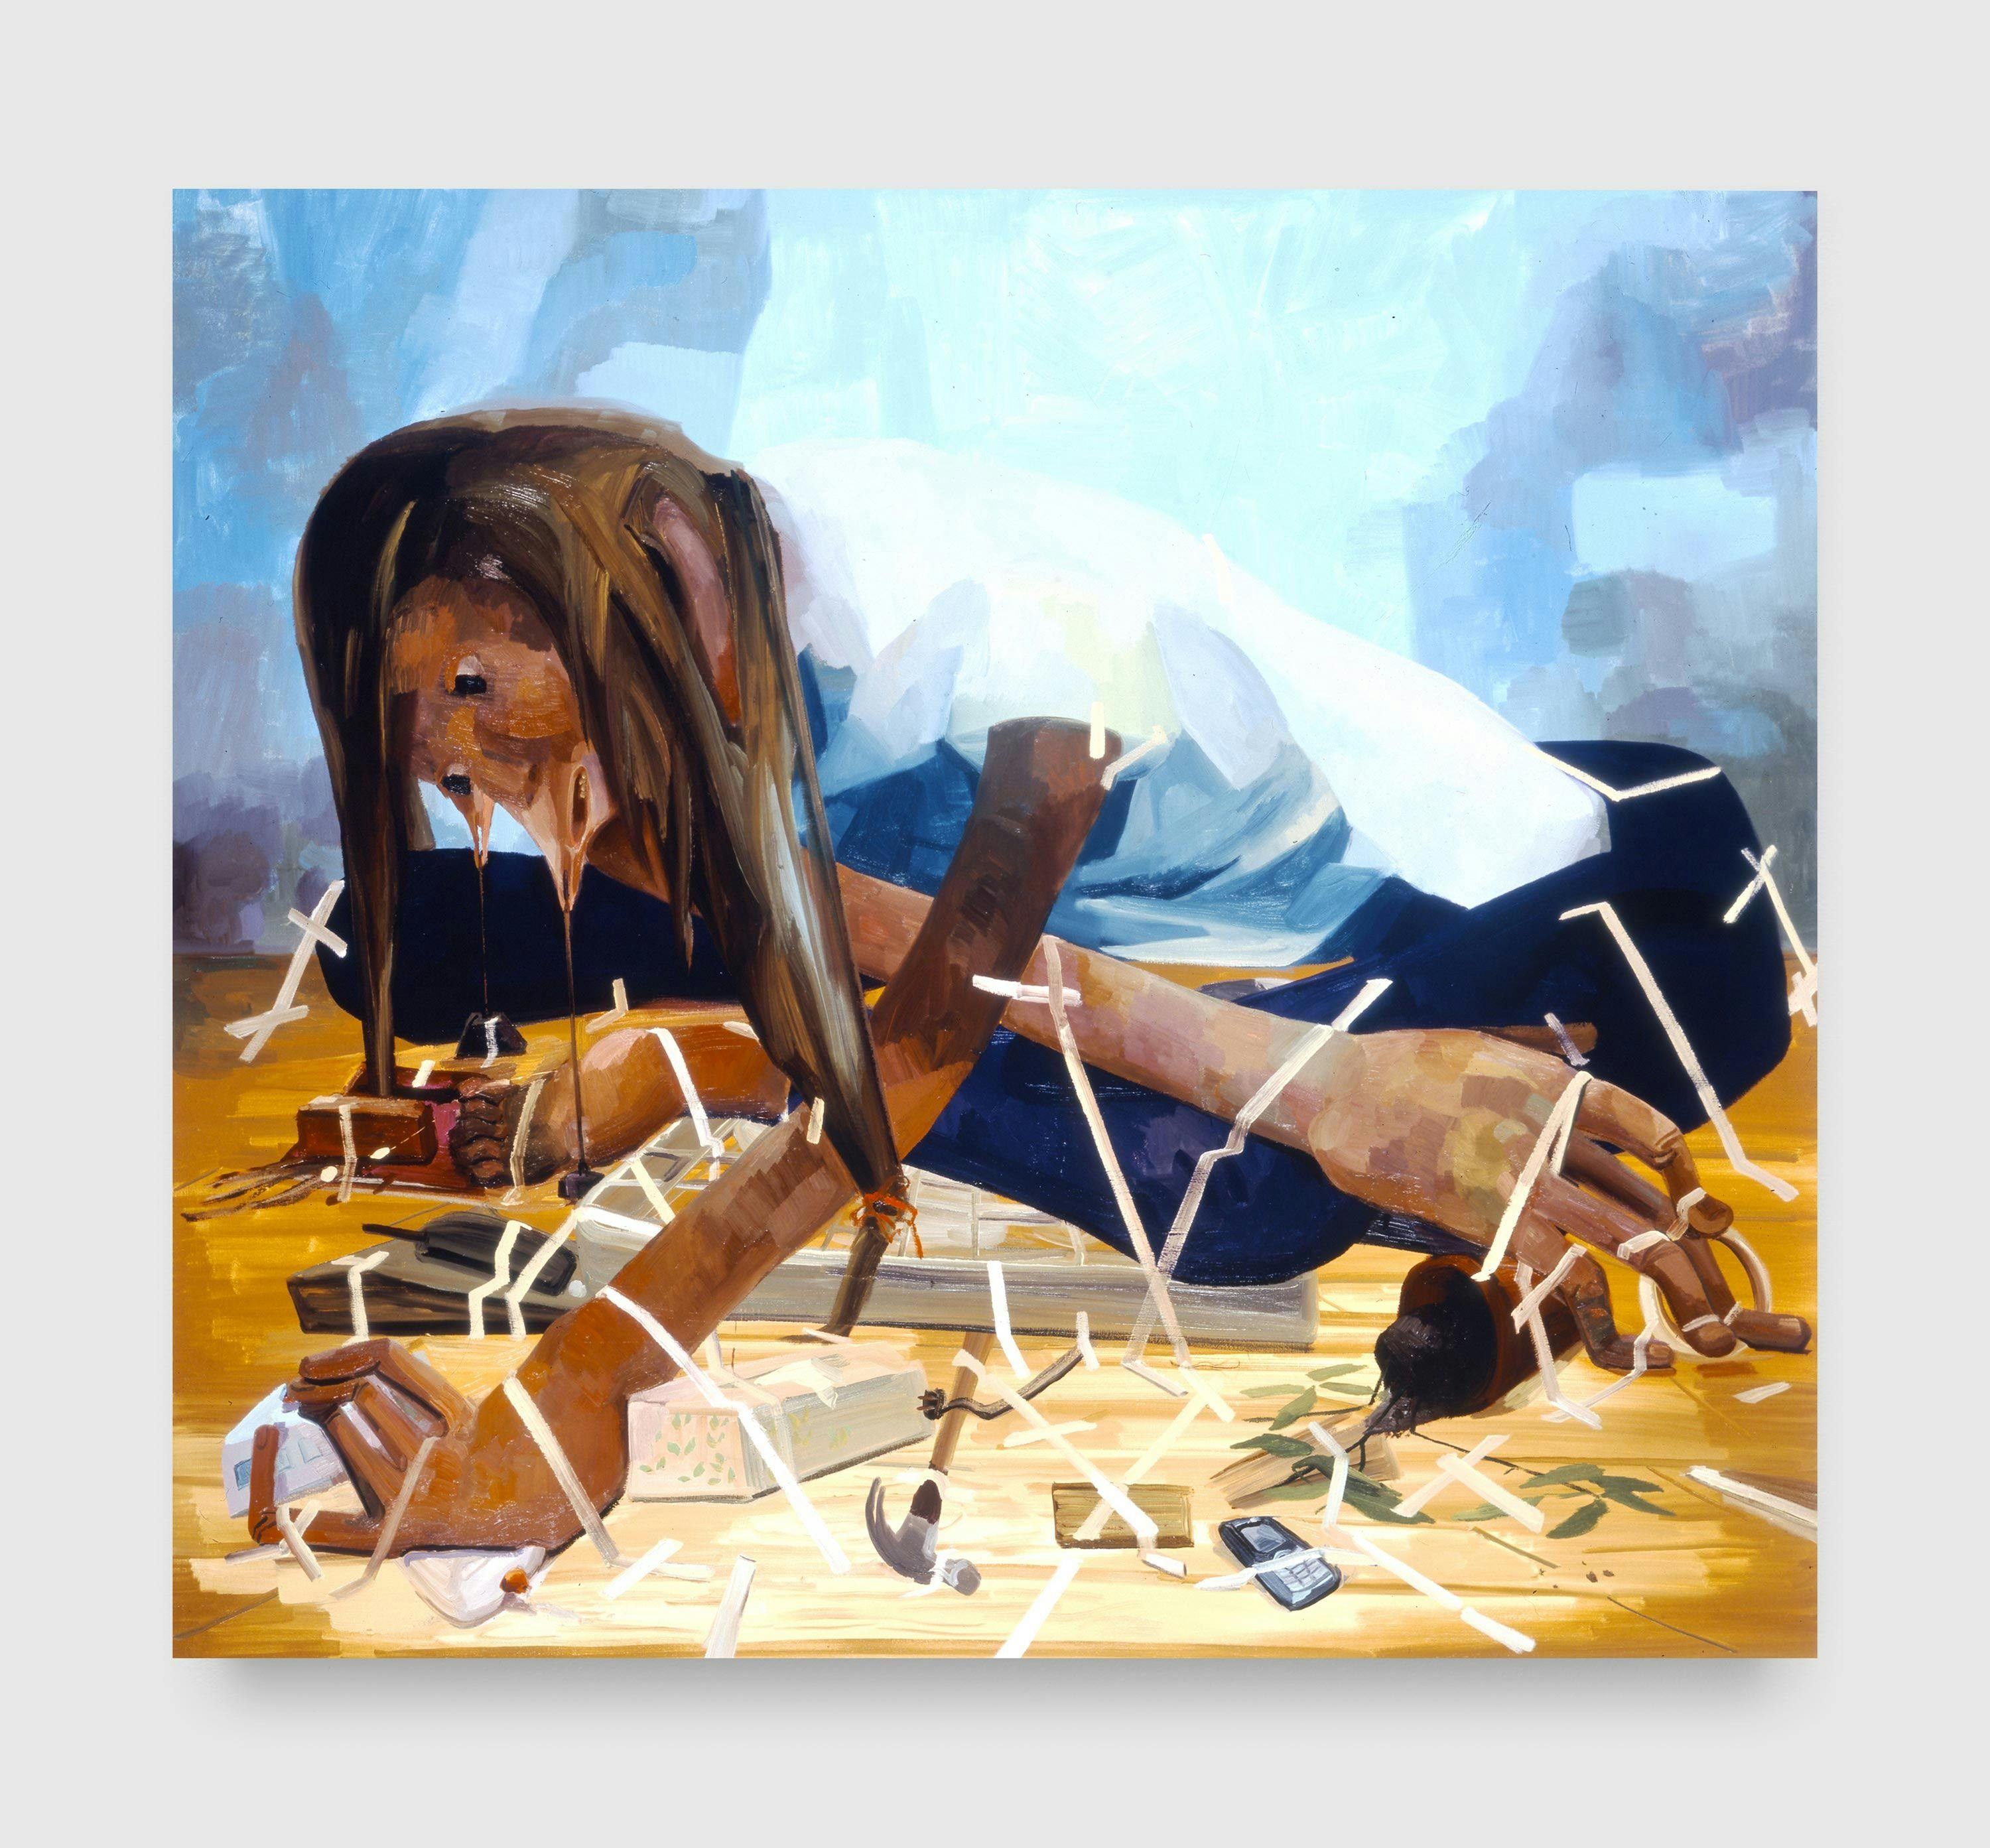 A painting by Dana Schutz, titled Gravity Fanatic, dated 2005.